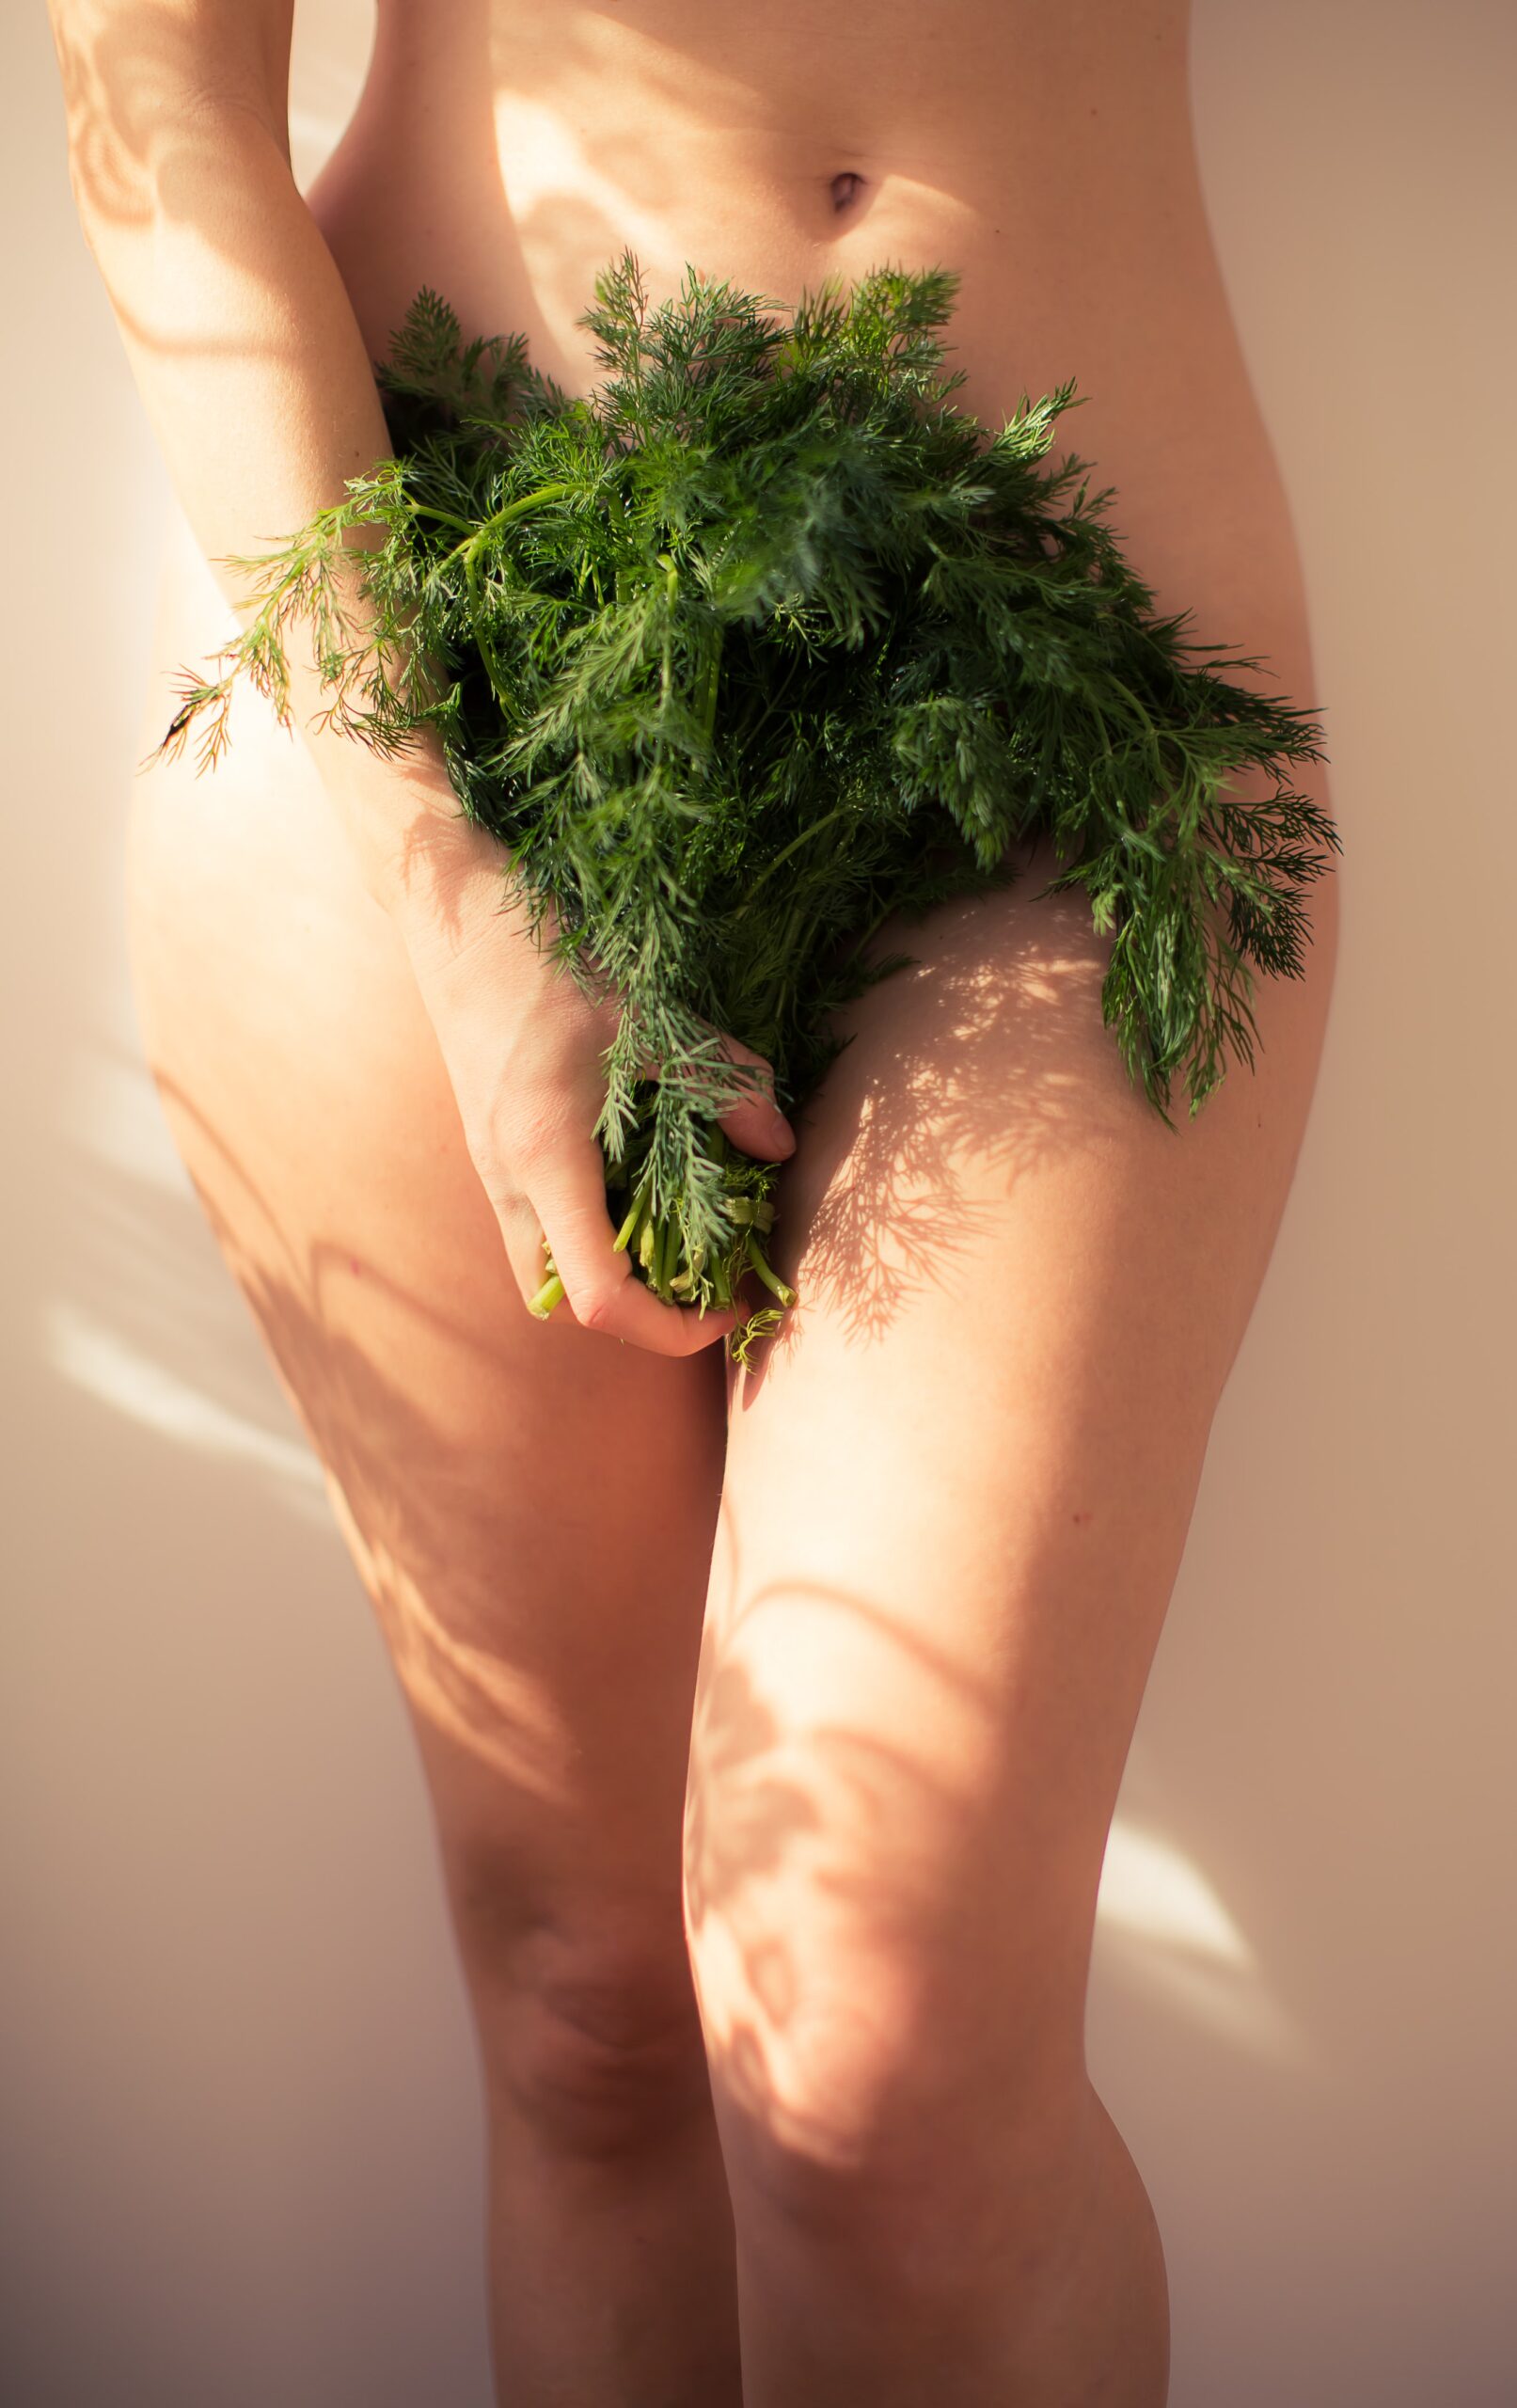 Lowe half of a female body with the vagina covered by a plant